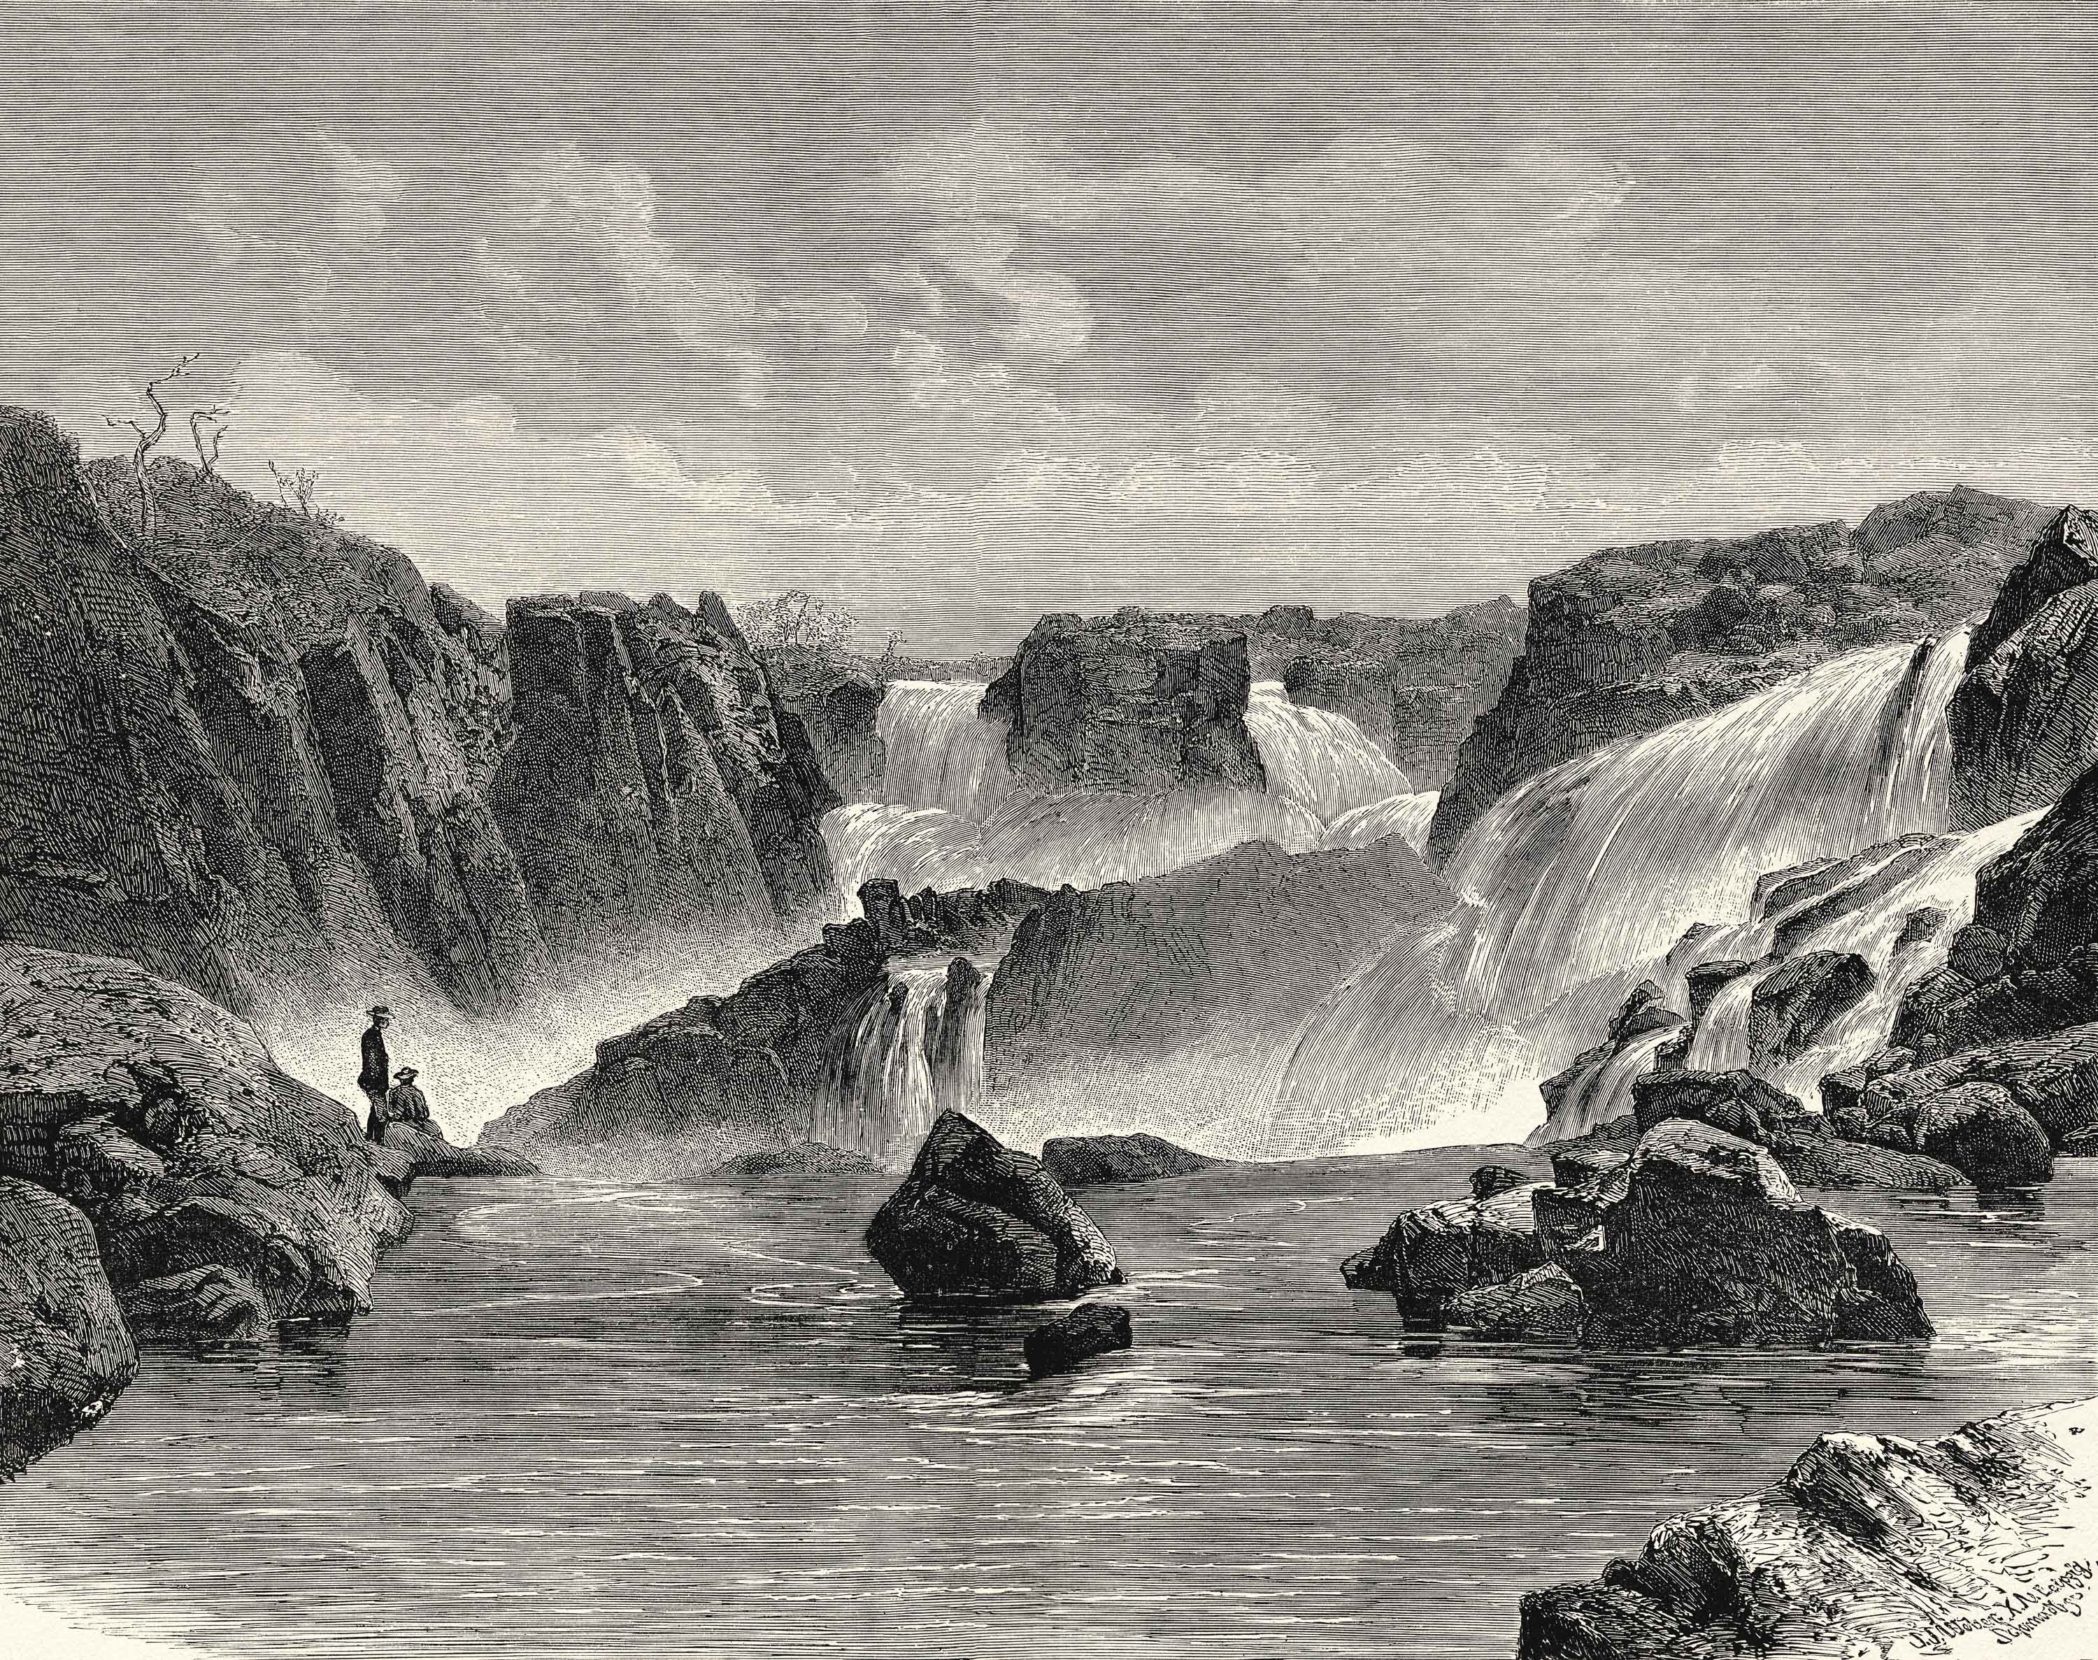 An engraved illustration from the 19th century depicts the force of Brazil’s São Francisco River at the Paulo Afonso Falls, where a network of hydroelectric dams now controls the waterway’s flow. Photo: Old Books Images/Alamy.